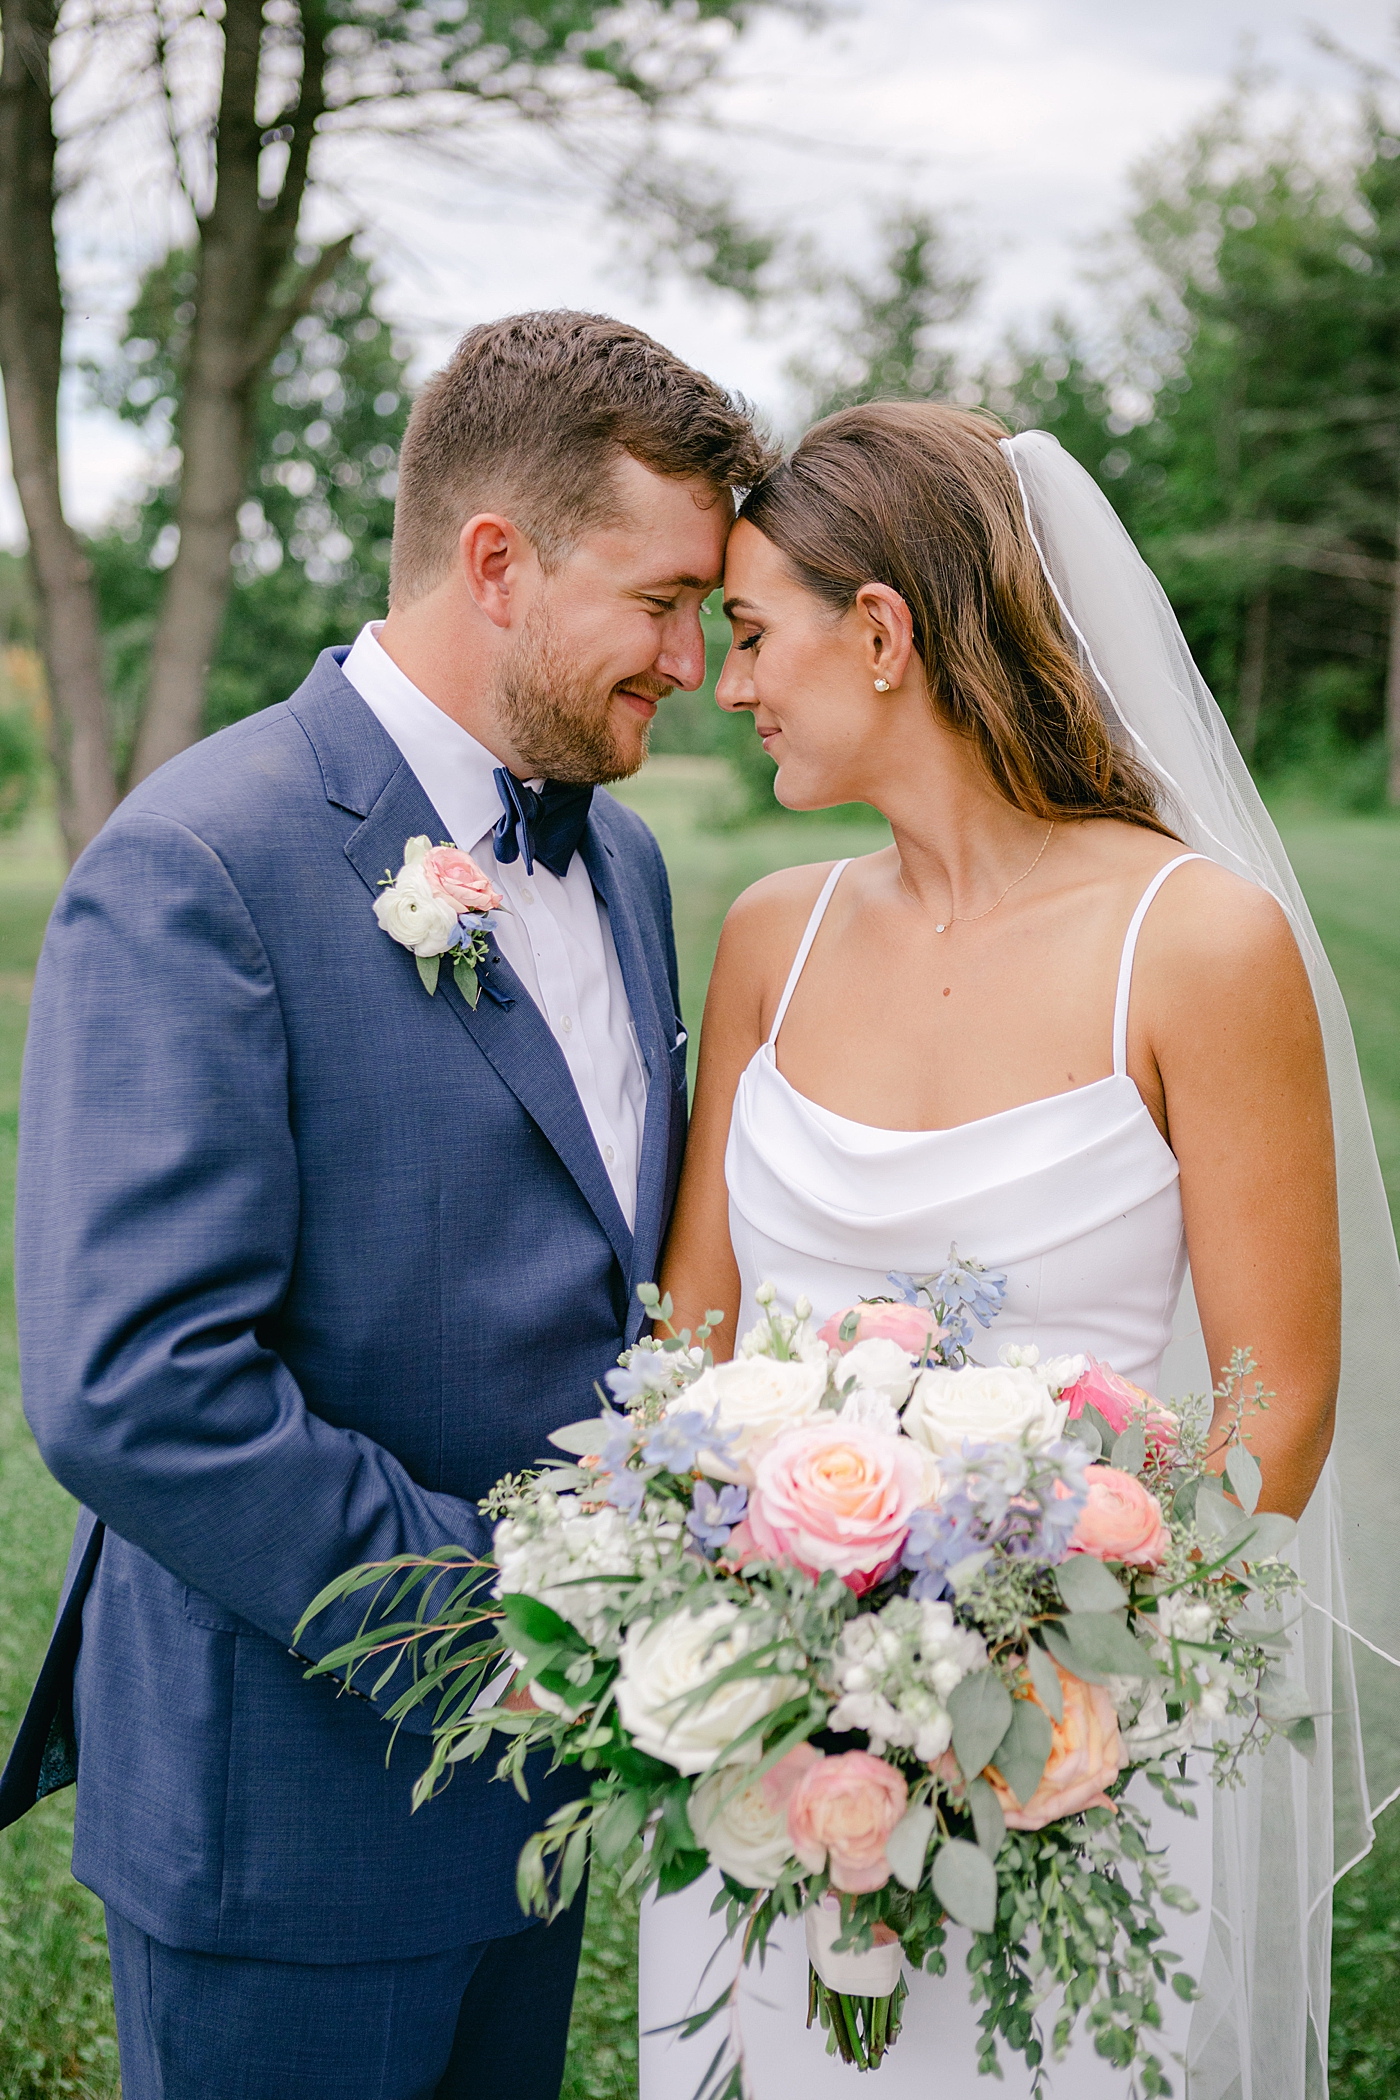 Close up of bride and groom with foreheads together | Image by Hope Helmuth Photography